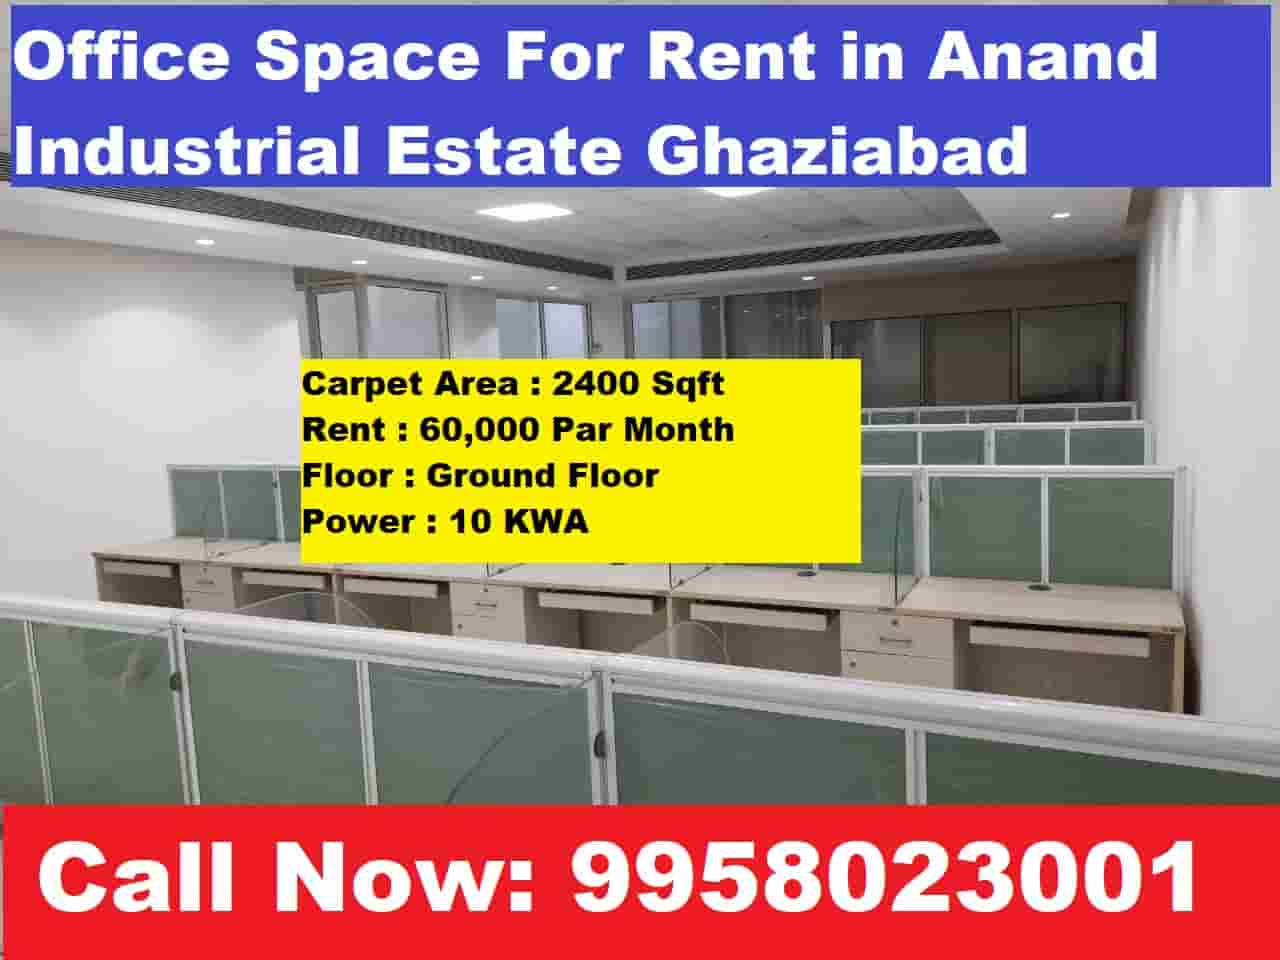 Office space for rent in Anand Industrial Estate Ghaziabad